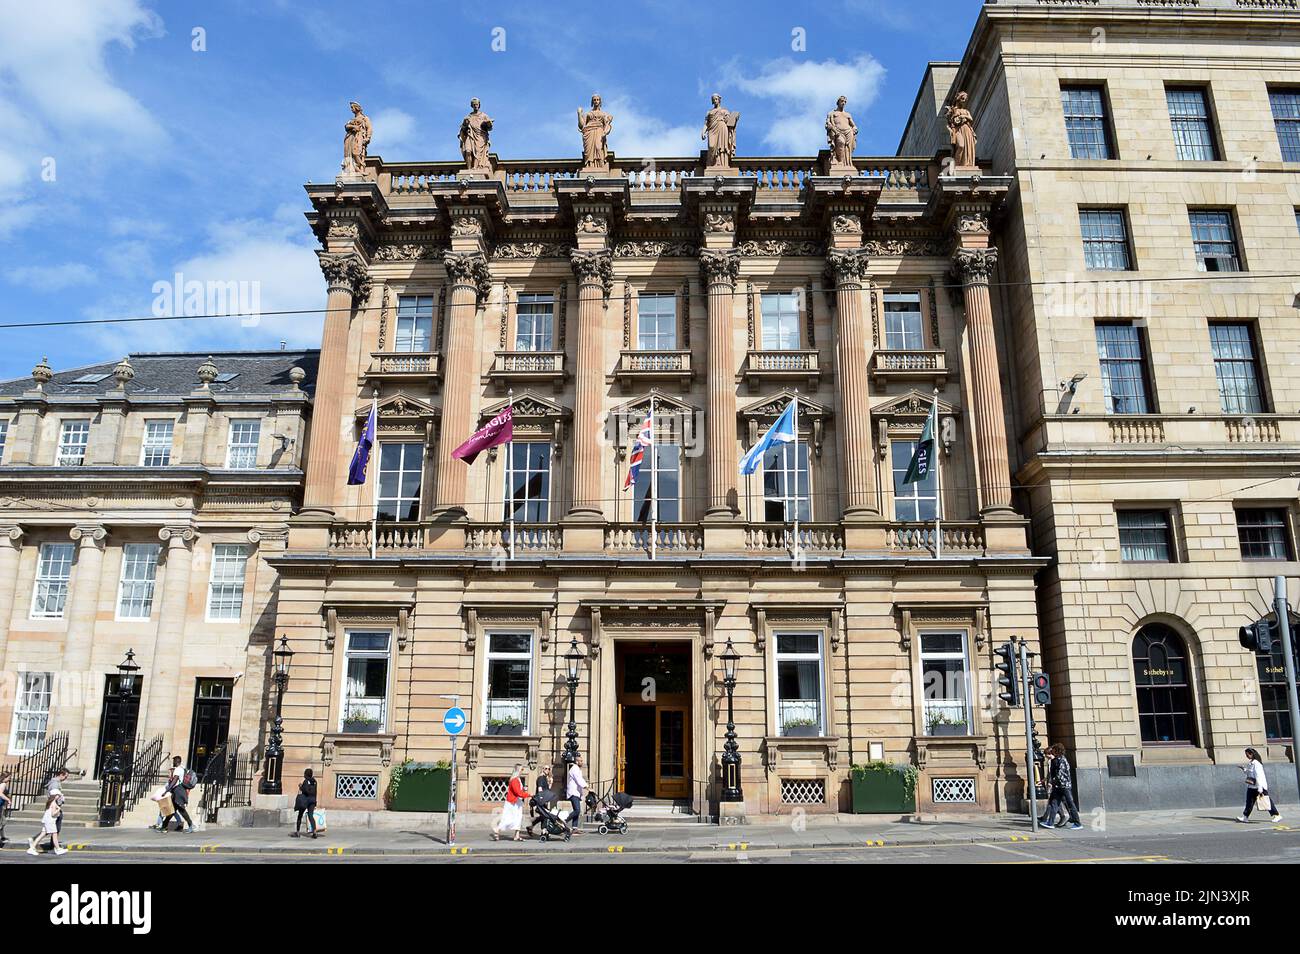 EDINBURGH, SCOTLAND - 1 AUGUST 2022: The former British Linen Bank building at 38-39 St Andrew Square, designed by David Bryce and built in 1851-2. Stock Photo